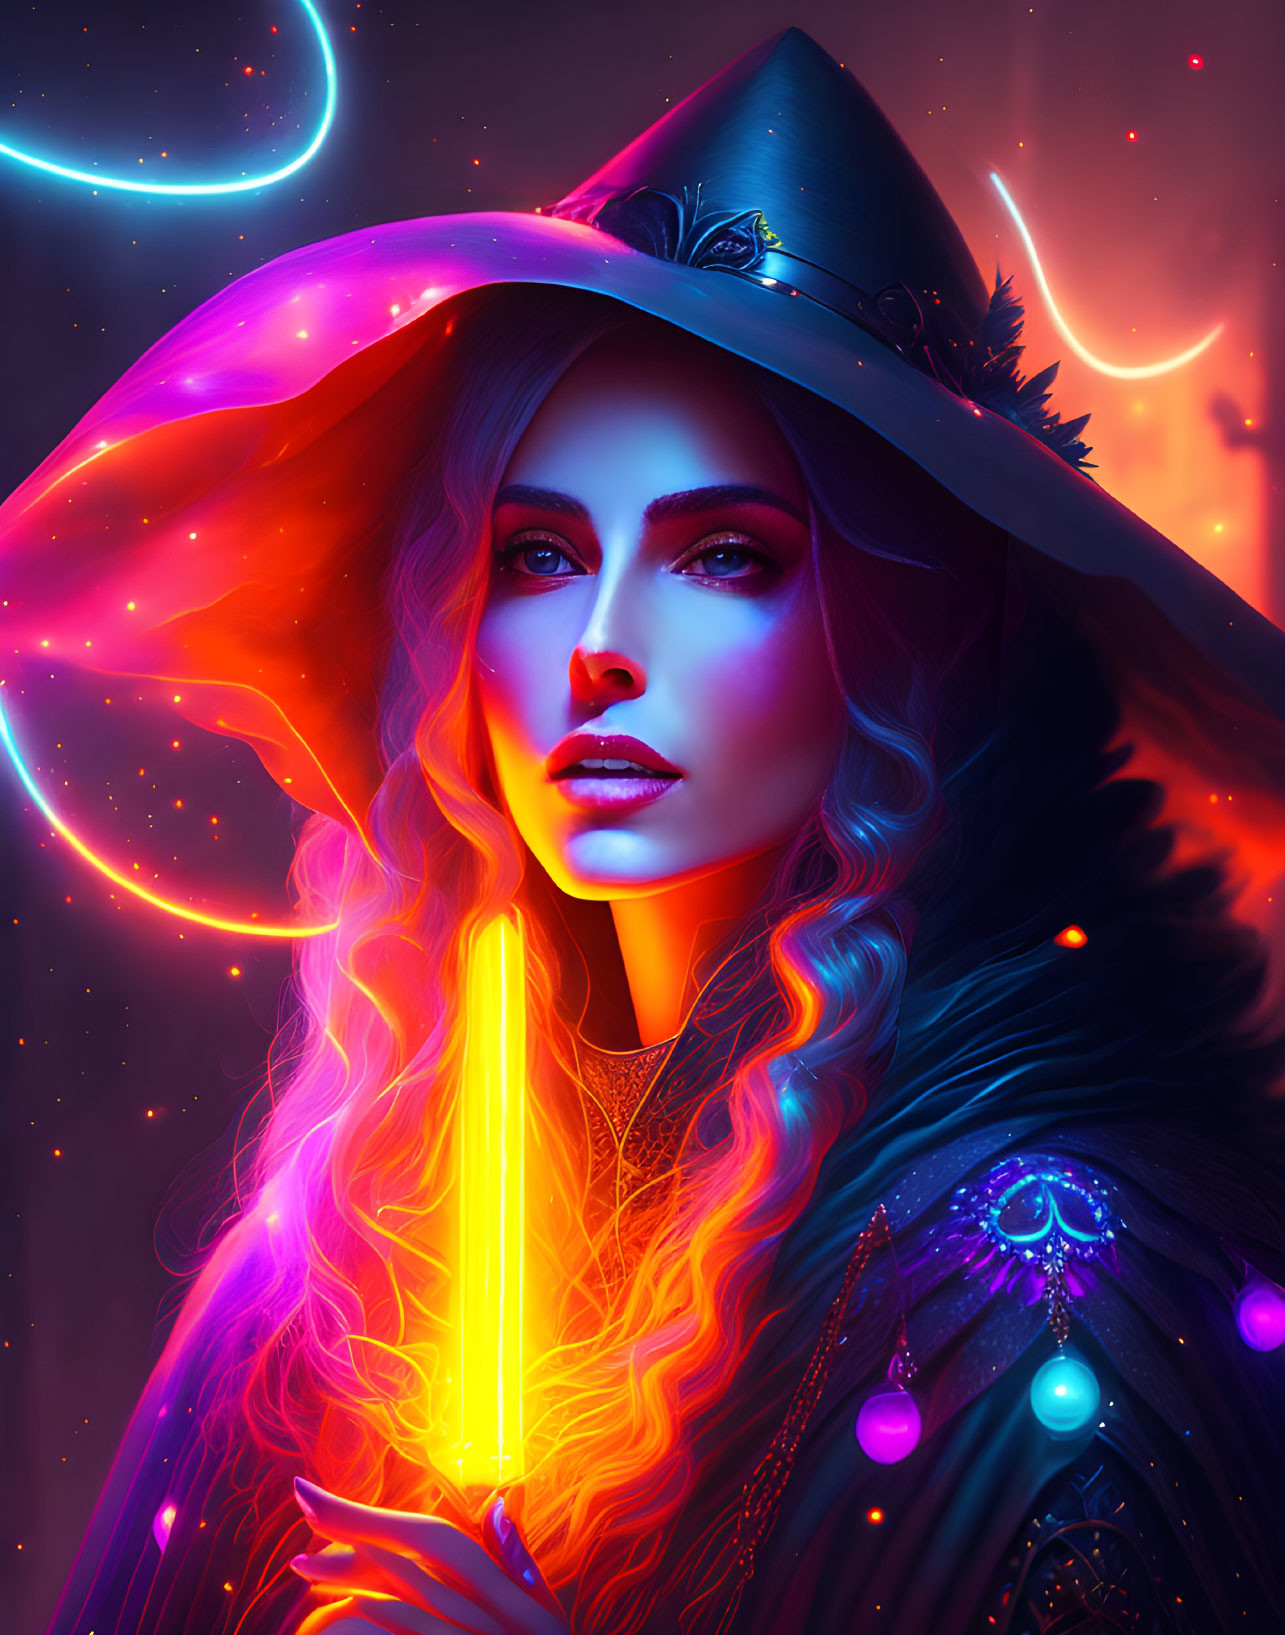 Portrait of woman with luminous flowing hair in witch's hat against vibrant neon background.